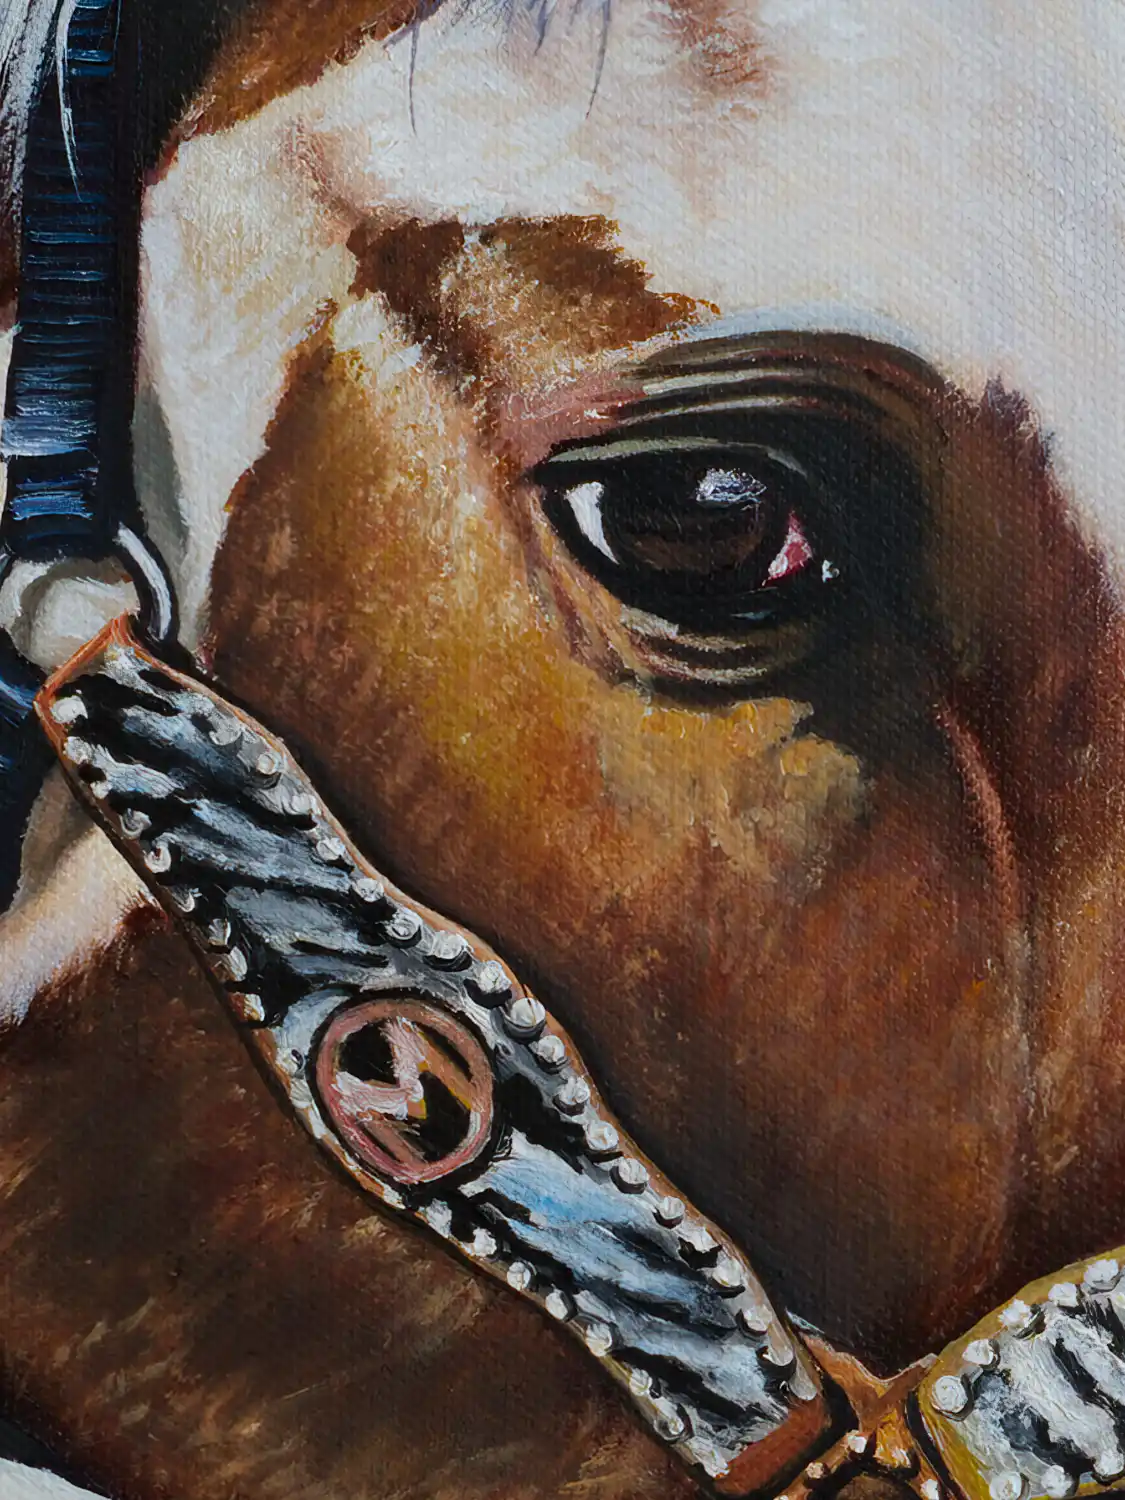 Close-up of a horse's eye and bridle from Monica Marquez Gatica's painting 'Golden Horse', displaying the fine art detail in oil.